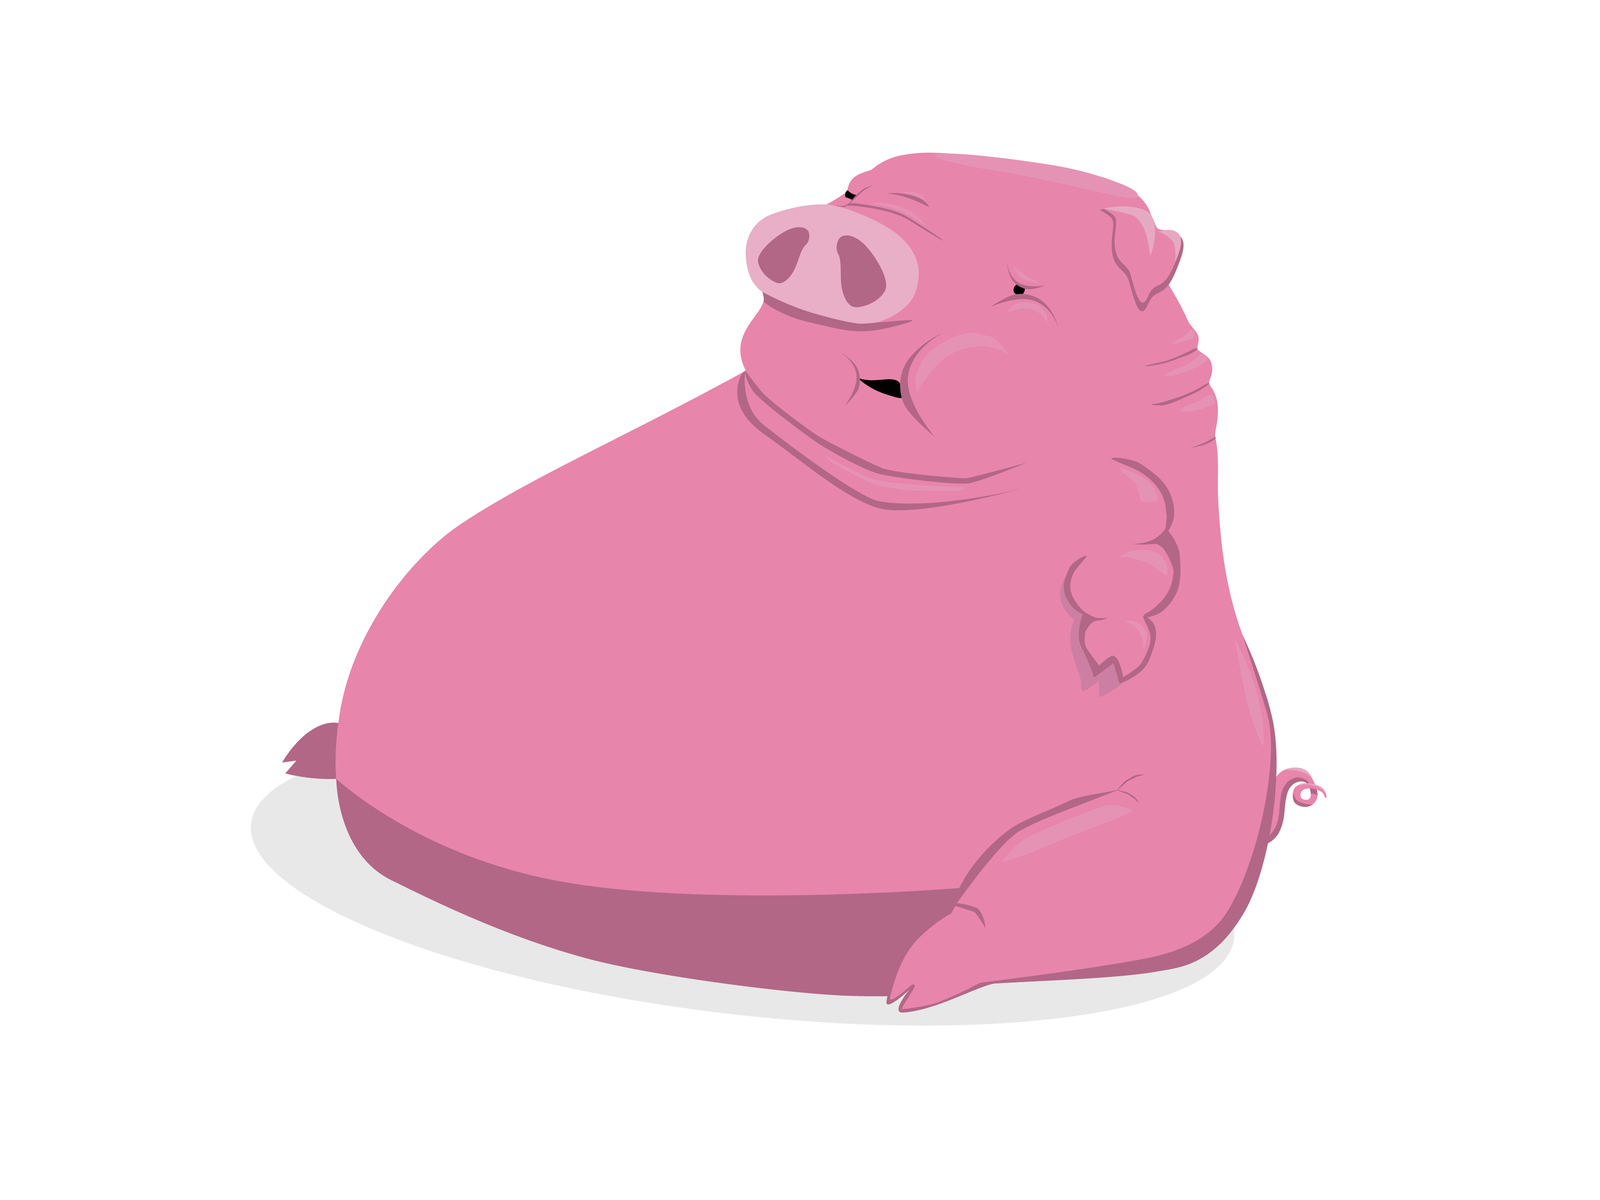 ugly pig by Calhan Ray on Dribbble